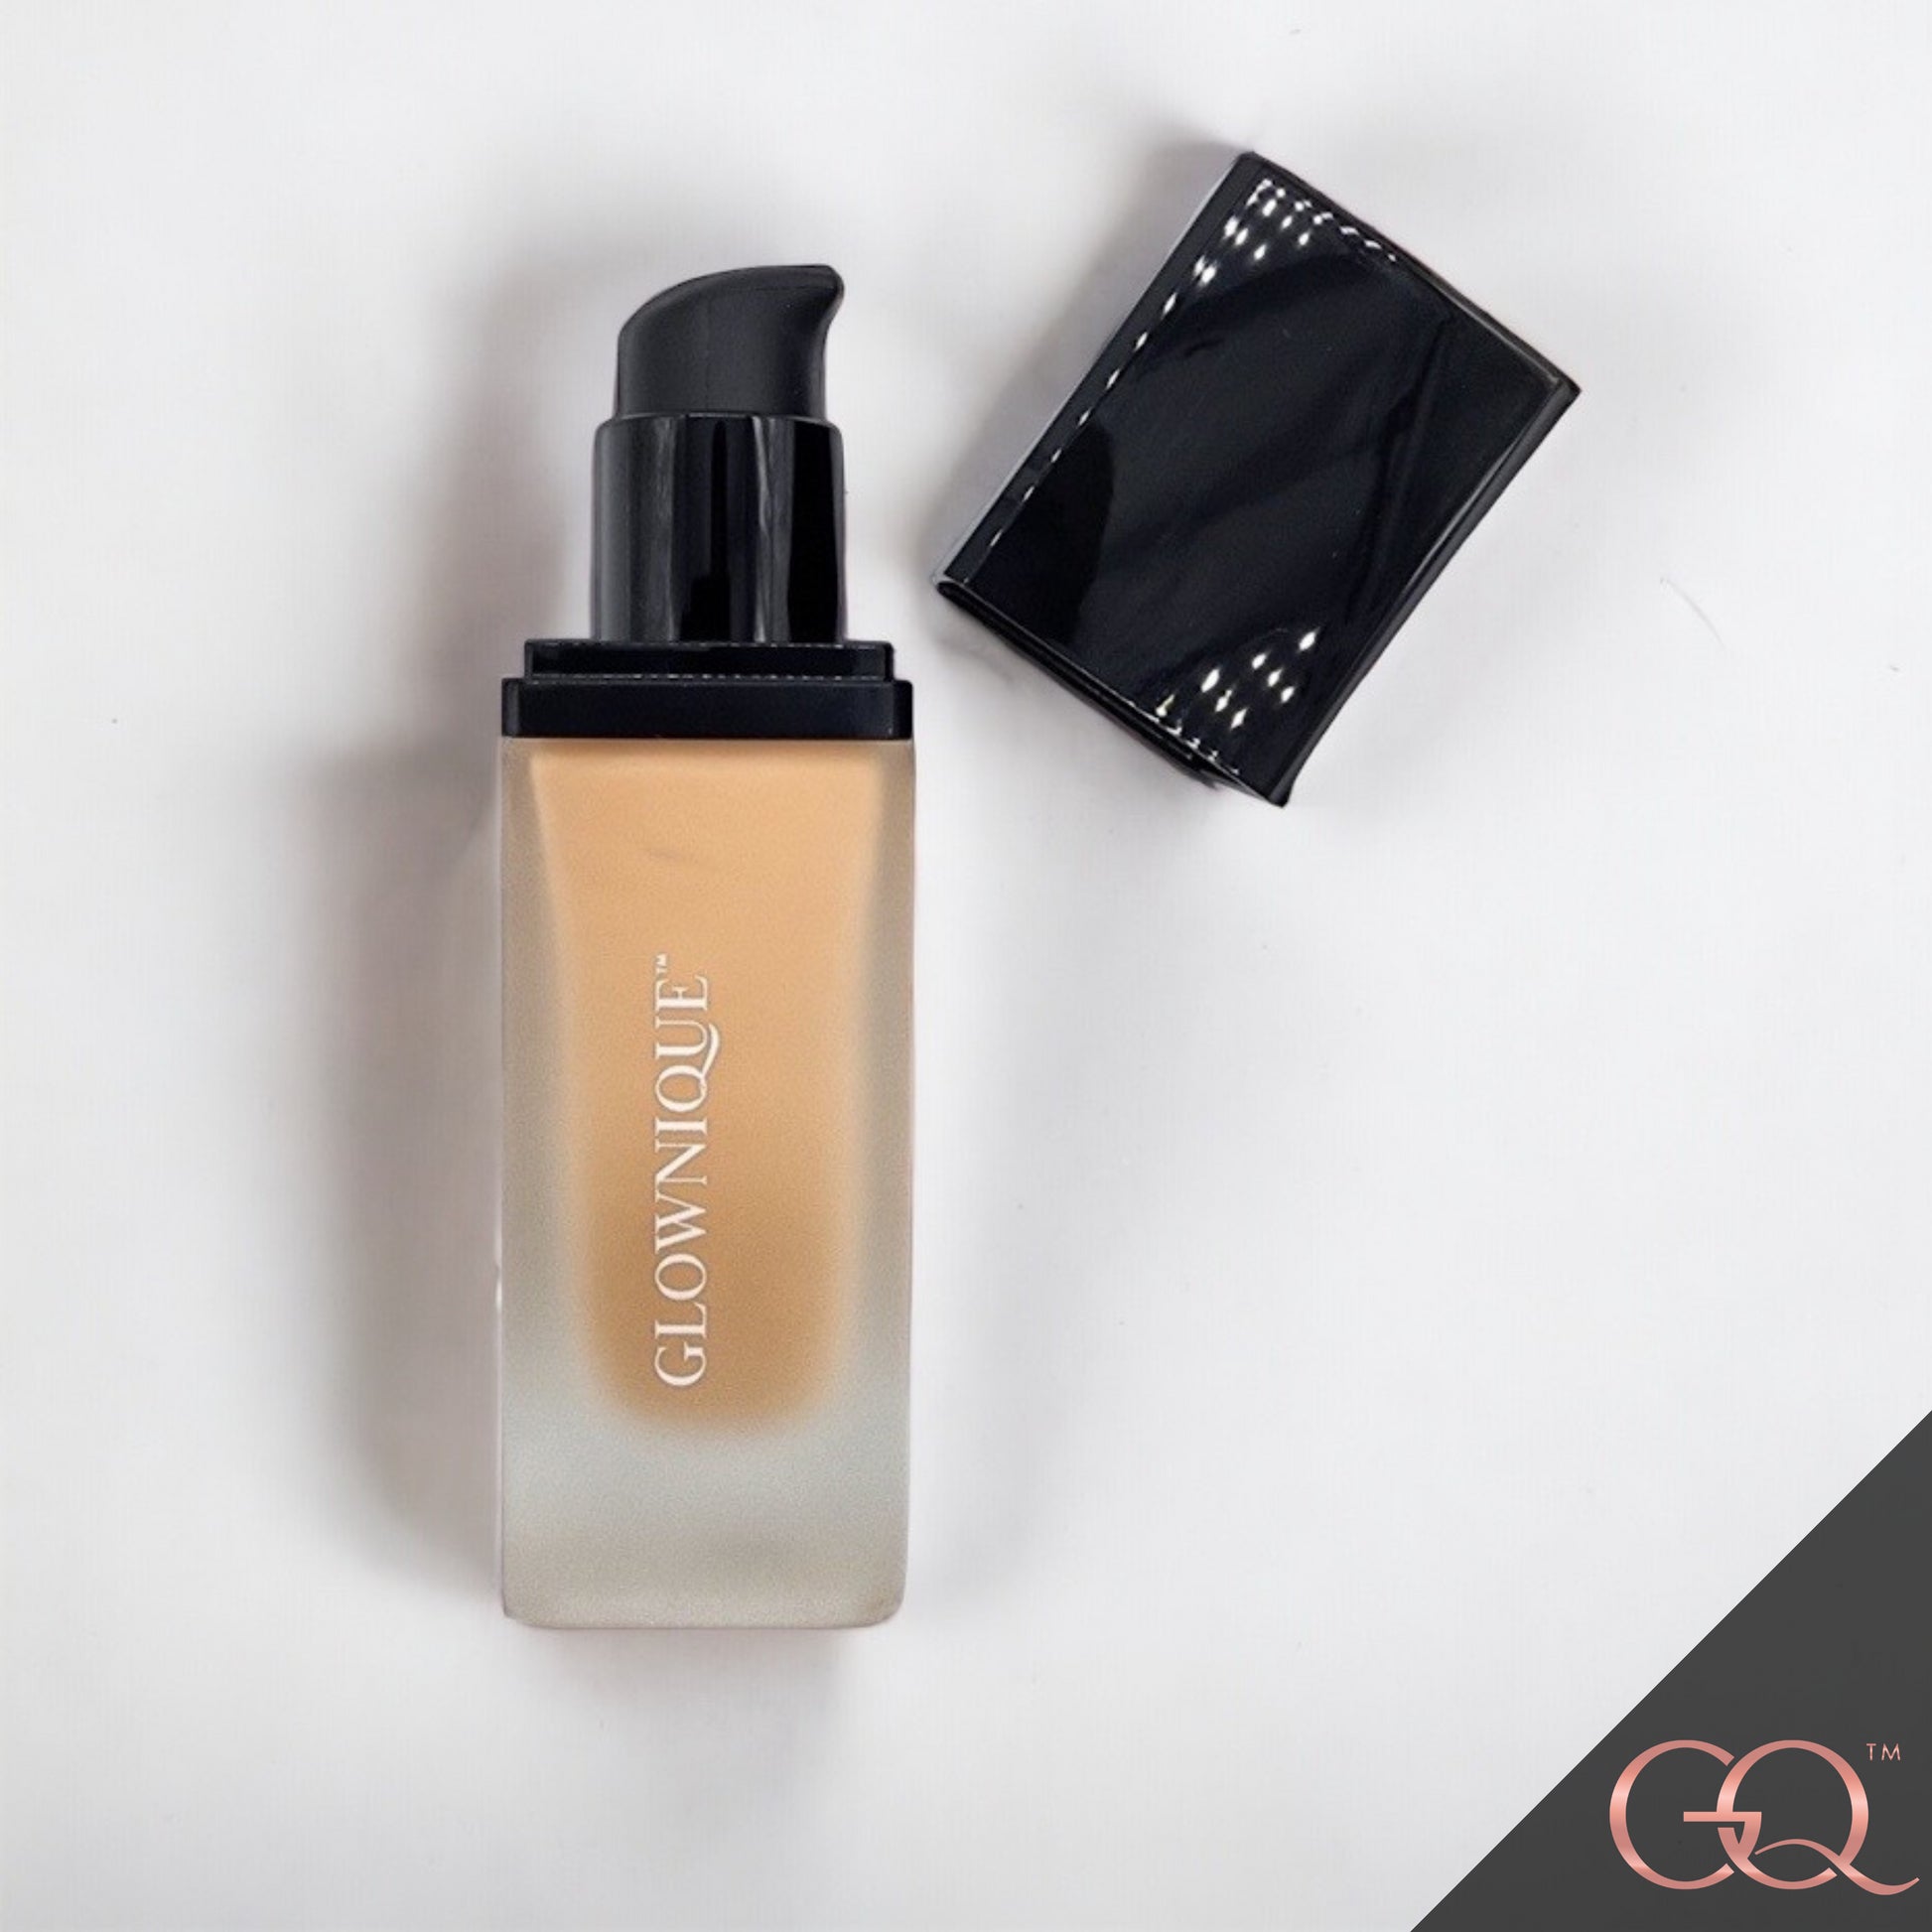 Foundation with SPF - Brunette | GLOWNIQUE